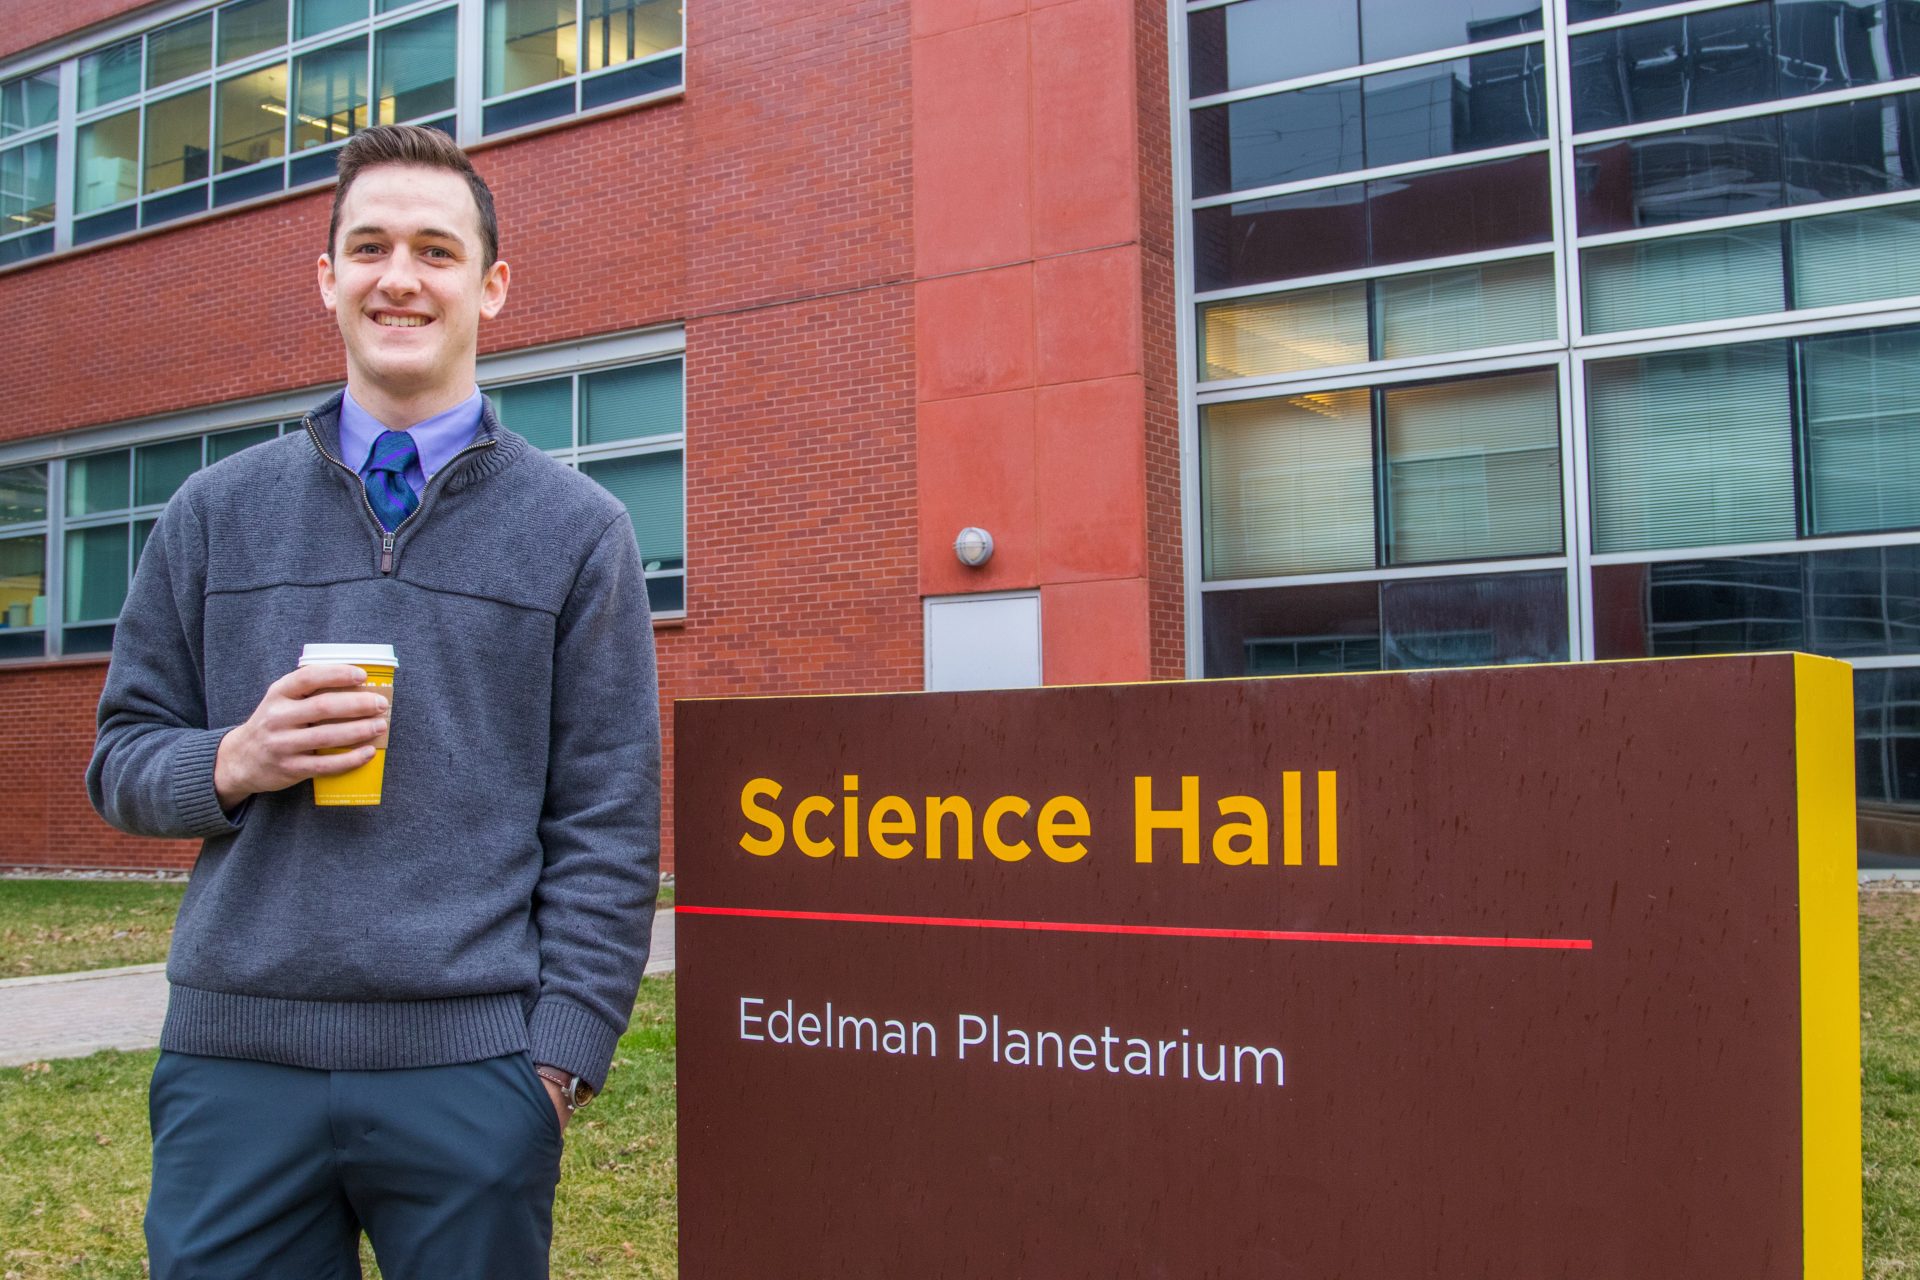 Andrew Milcarek, a Translational Biomedical Sciences major at Rowan University, stands outside Science Hall with a cup of Peet's coffee.